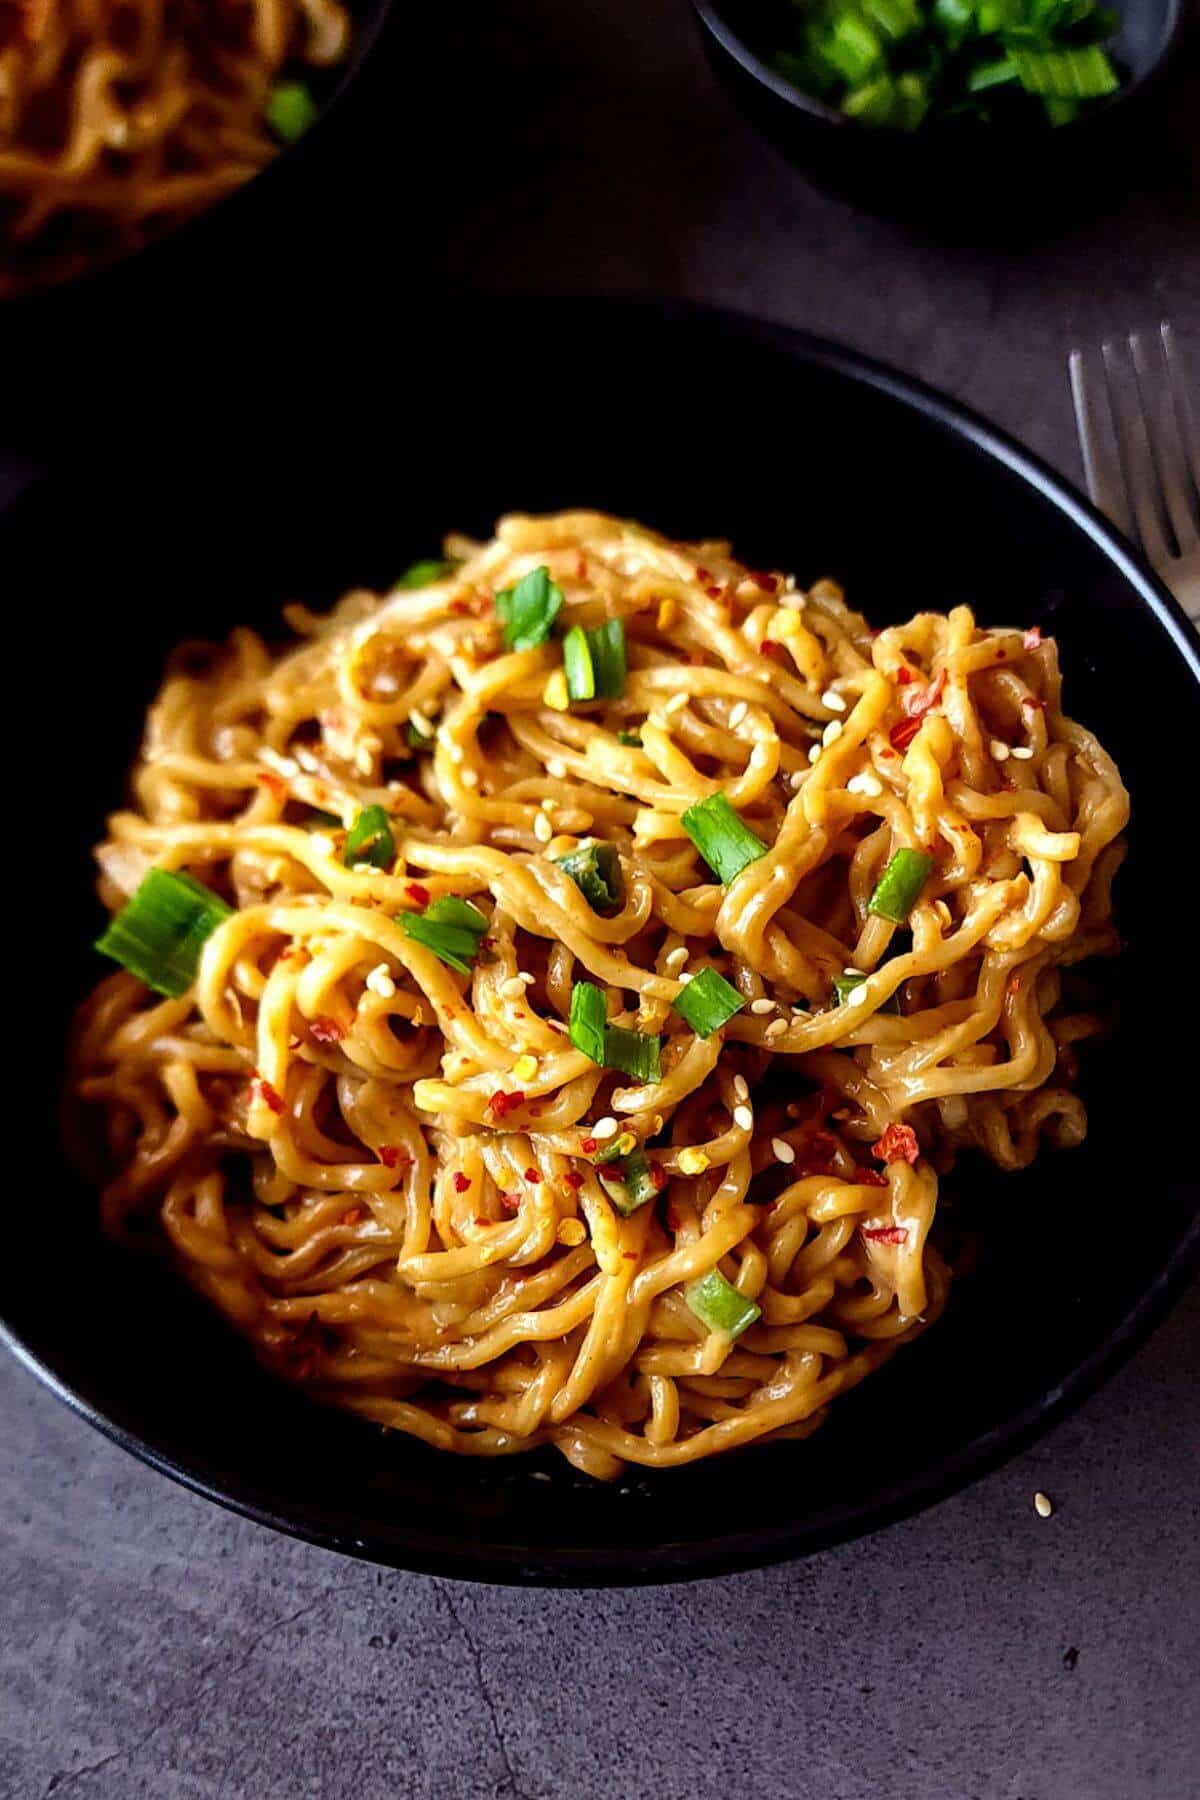 Peanut sauce noodles in a black bowl with a fork on the side.